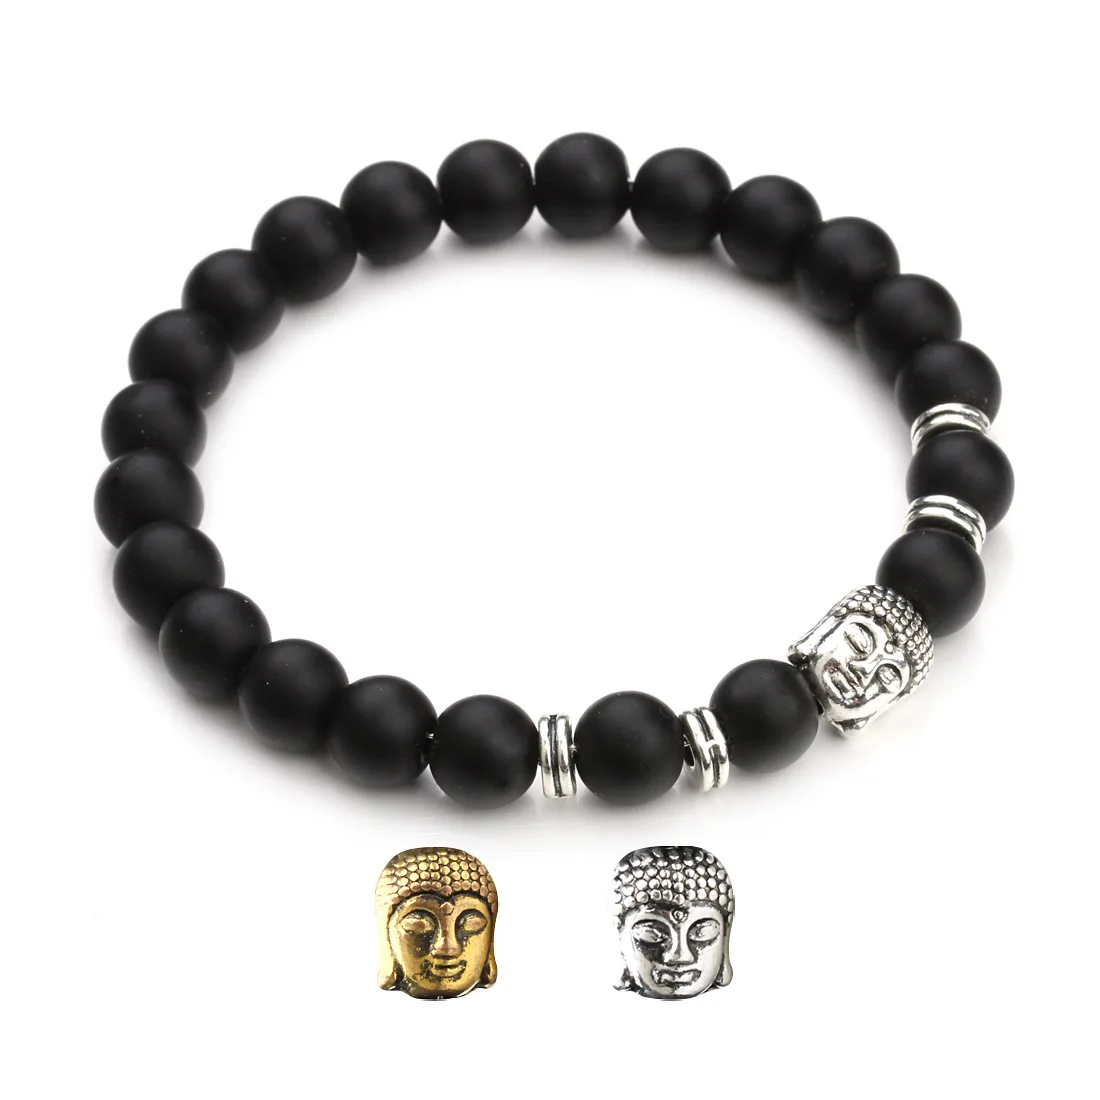 

2019 New Black Matte Agate 8mm Beads Elastic Cord Men Bracelet With Buddha Head Accessories